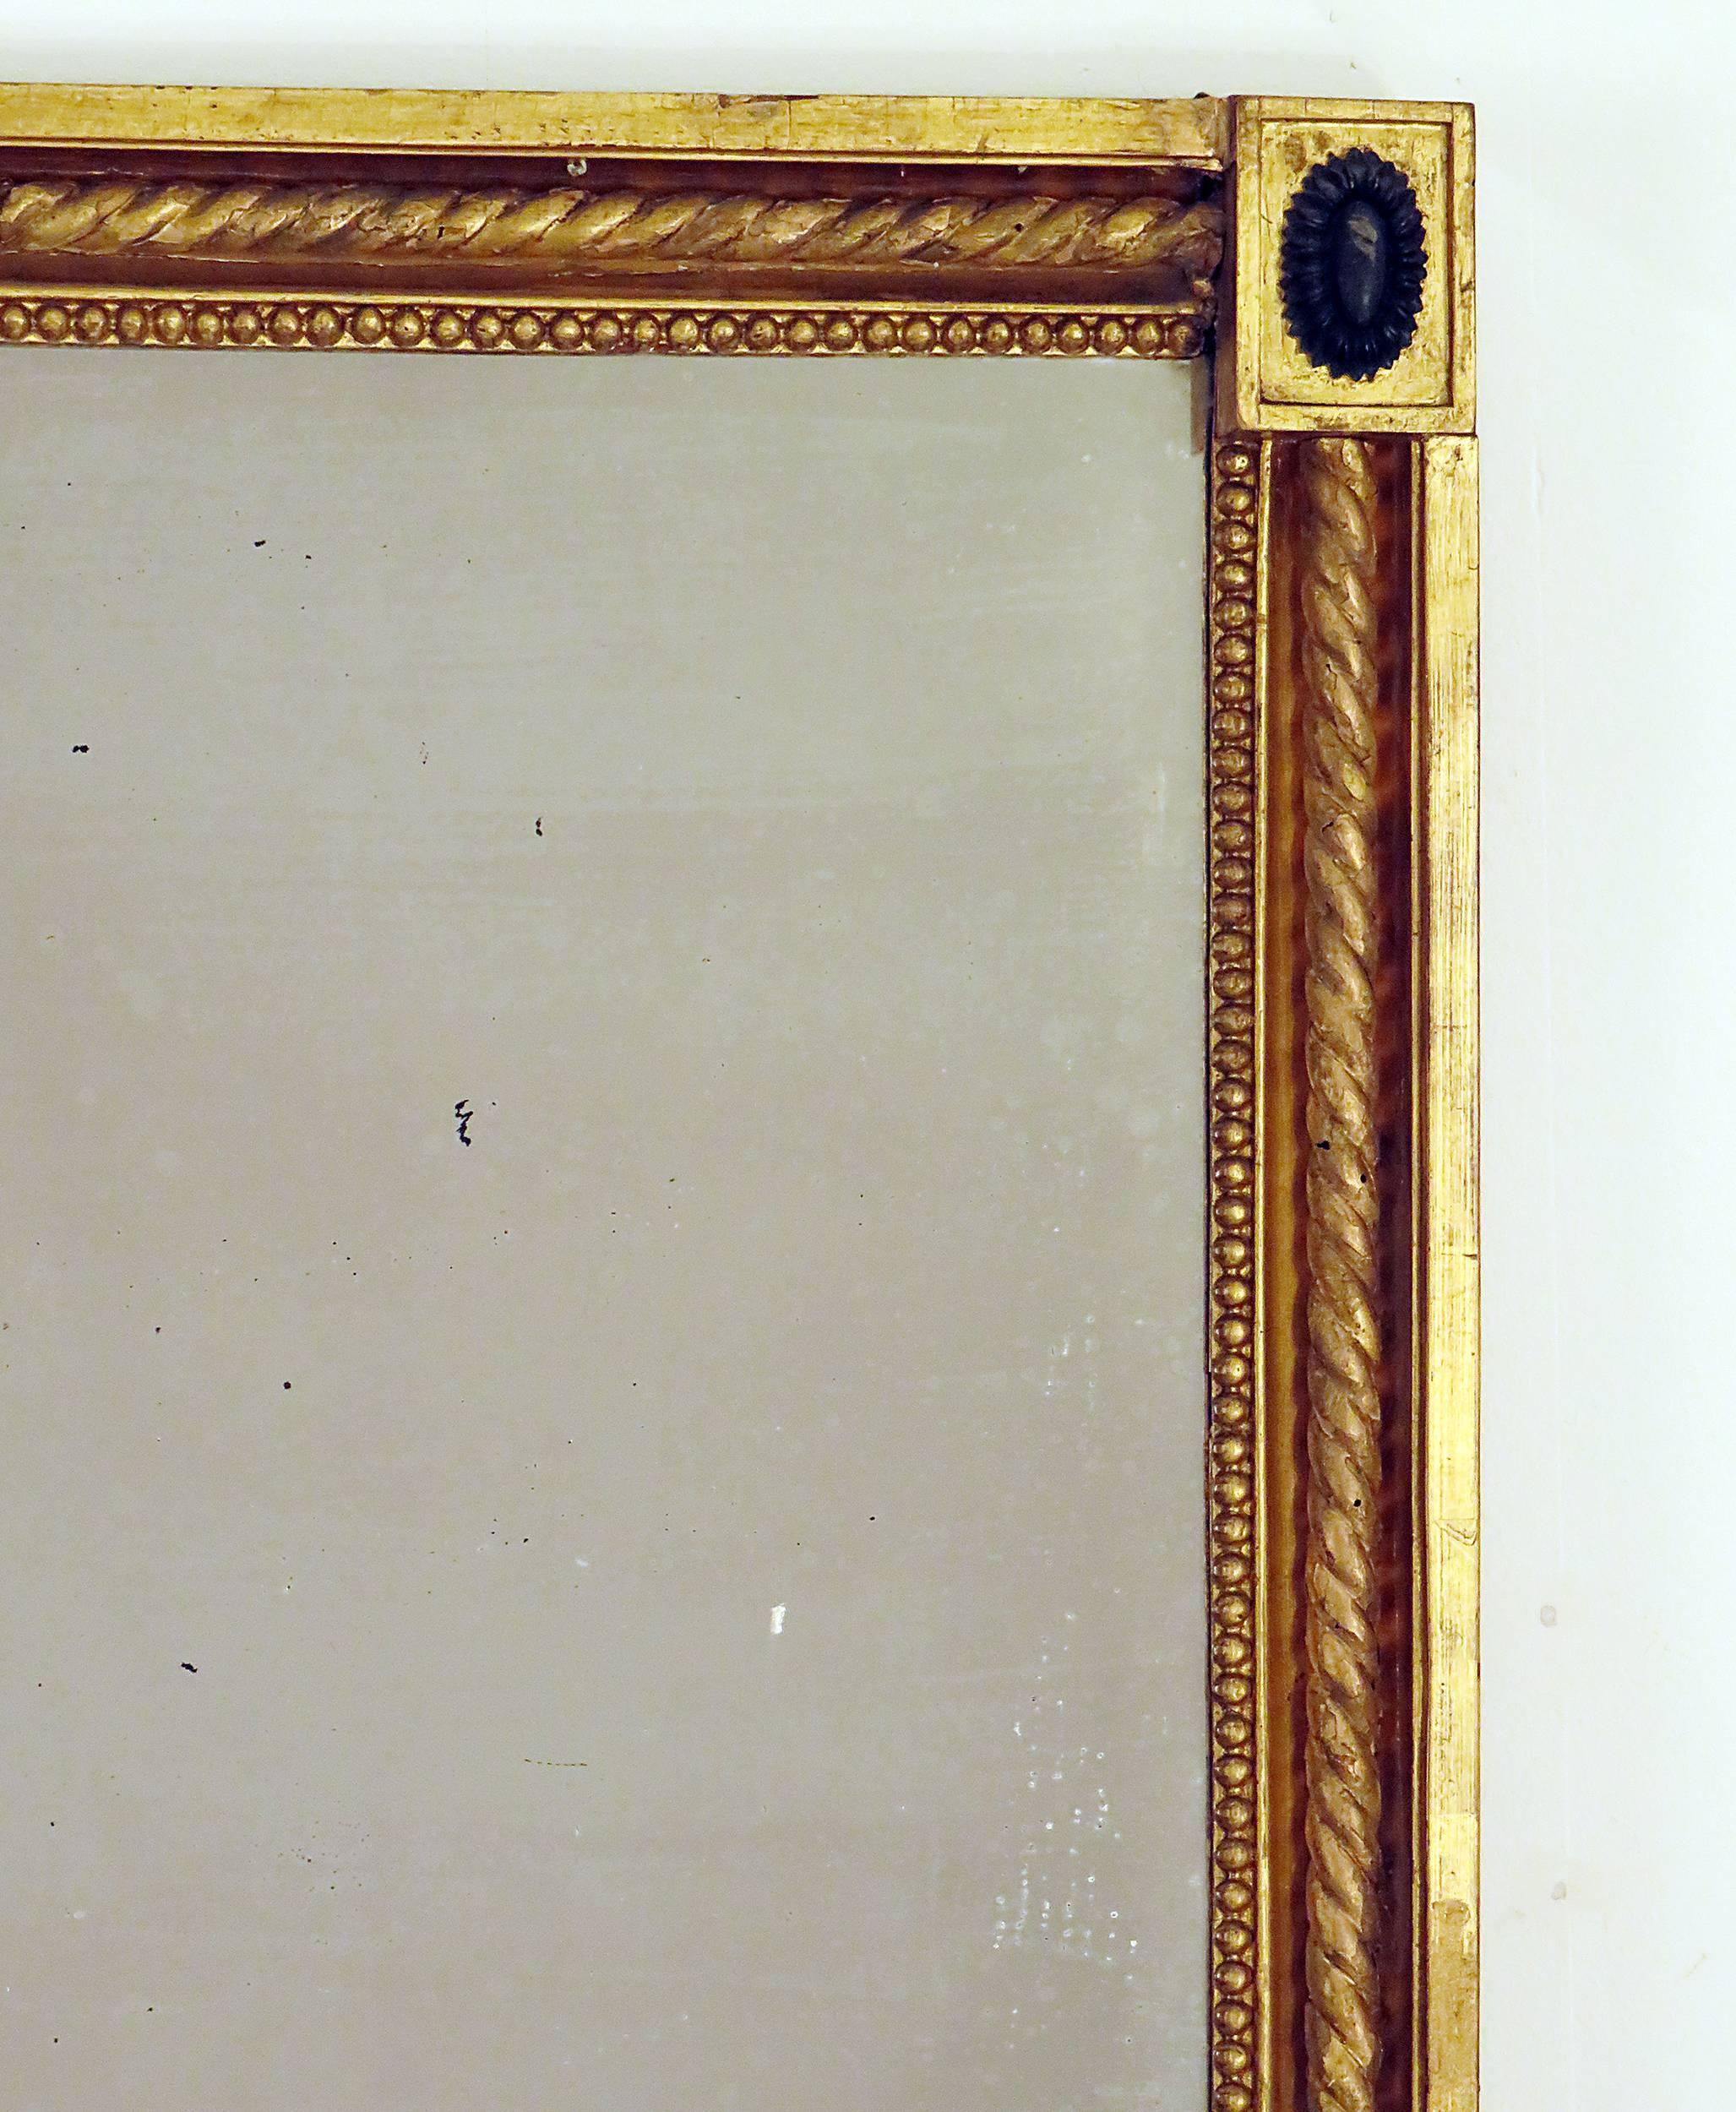 A sophisticated rectangular Swedish gilt and ebonized wood neoclassical mirror from the first part of the 19th century. The detailed giltwood carved rope twist with stylized oval flowers in the corners make this attribution easy. In good overall